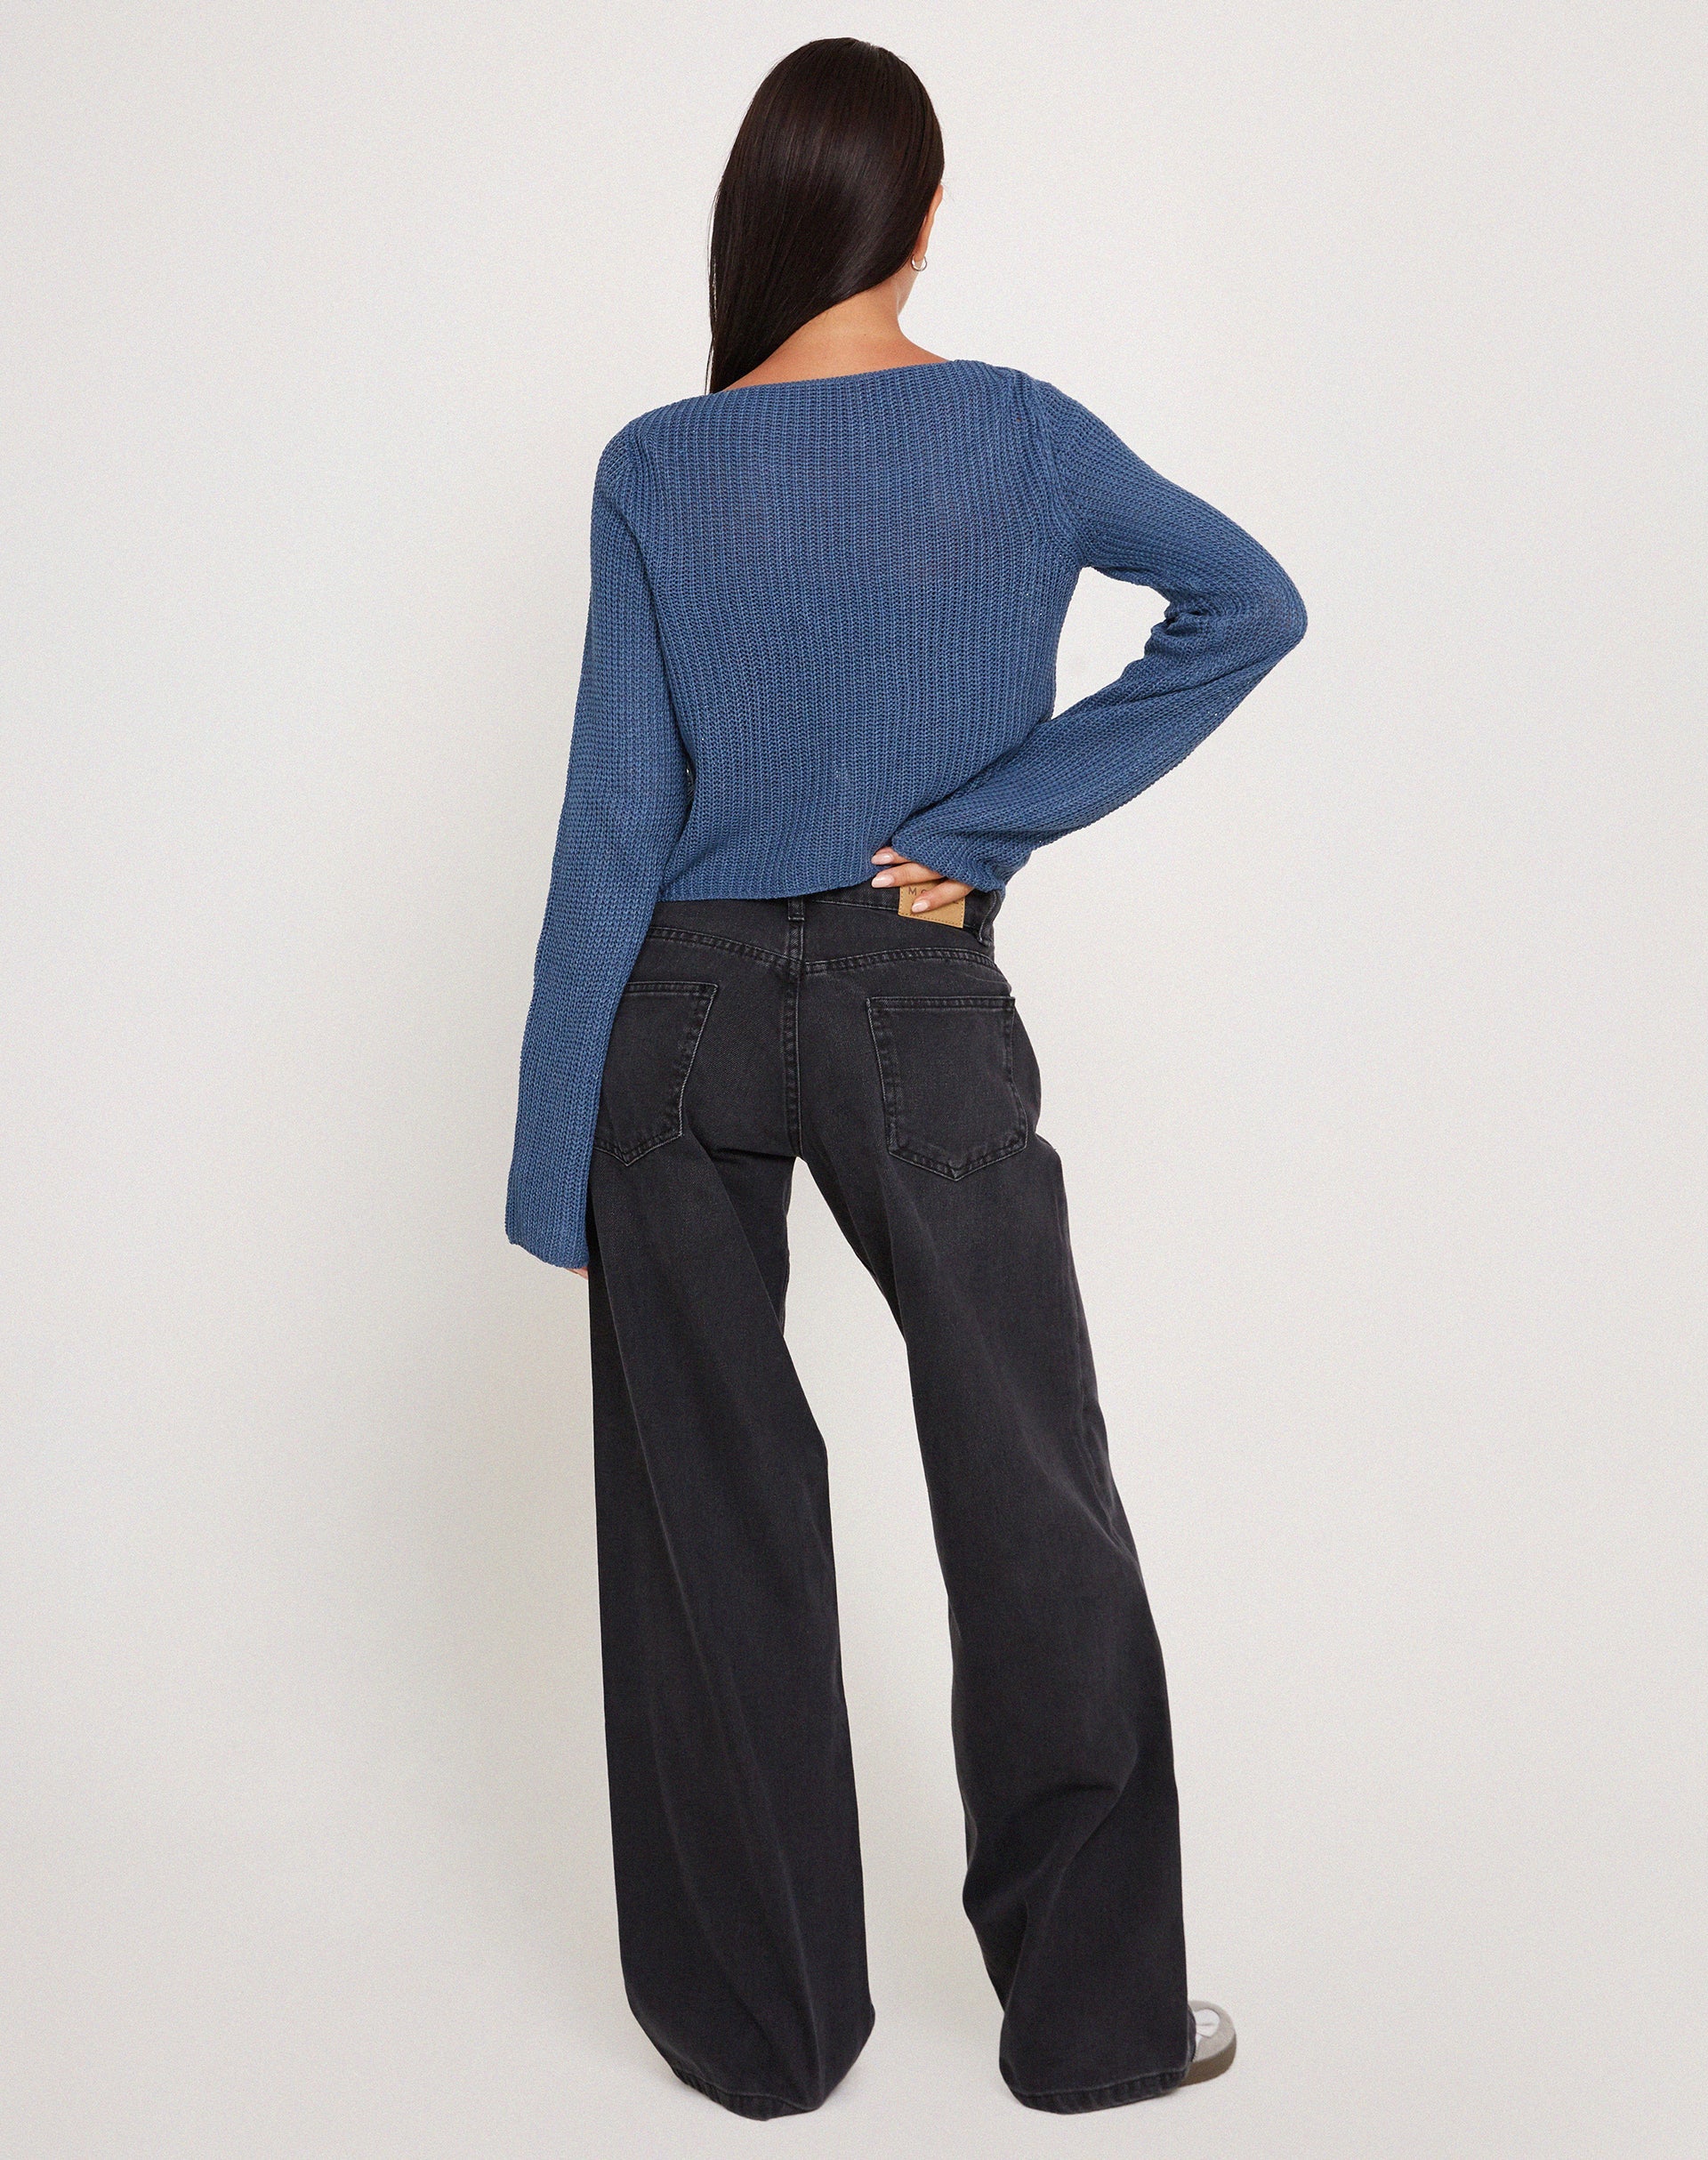 image of Kazayo Long Sleeve Knit Top in Midnight Blue